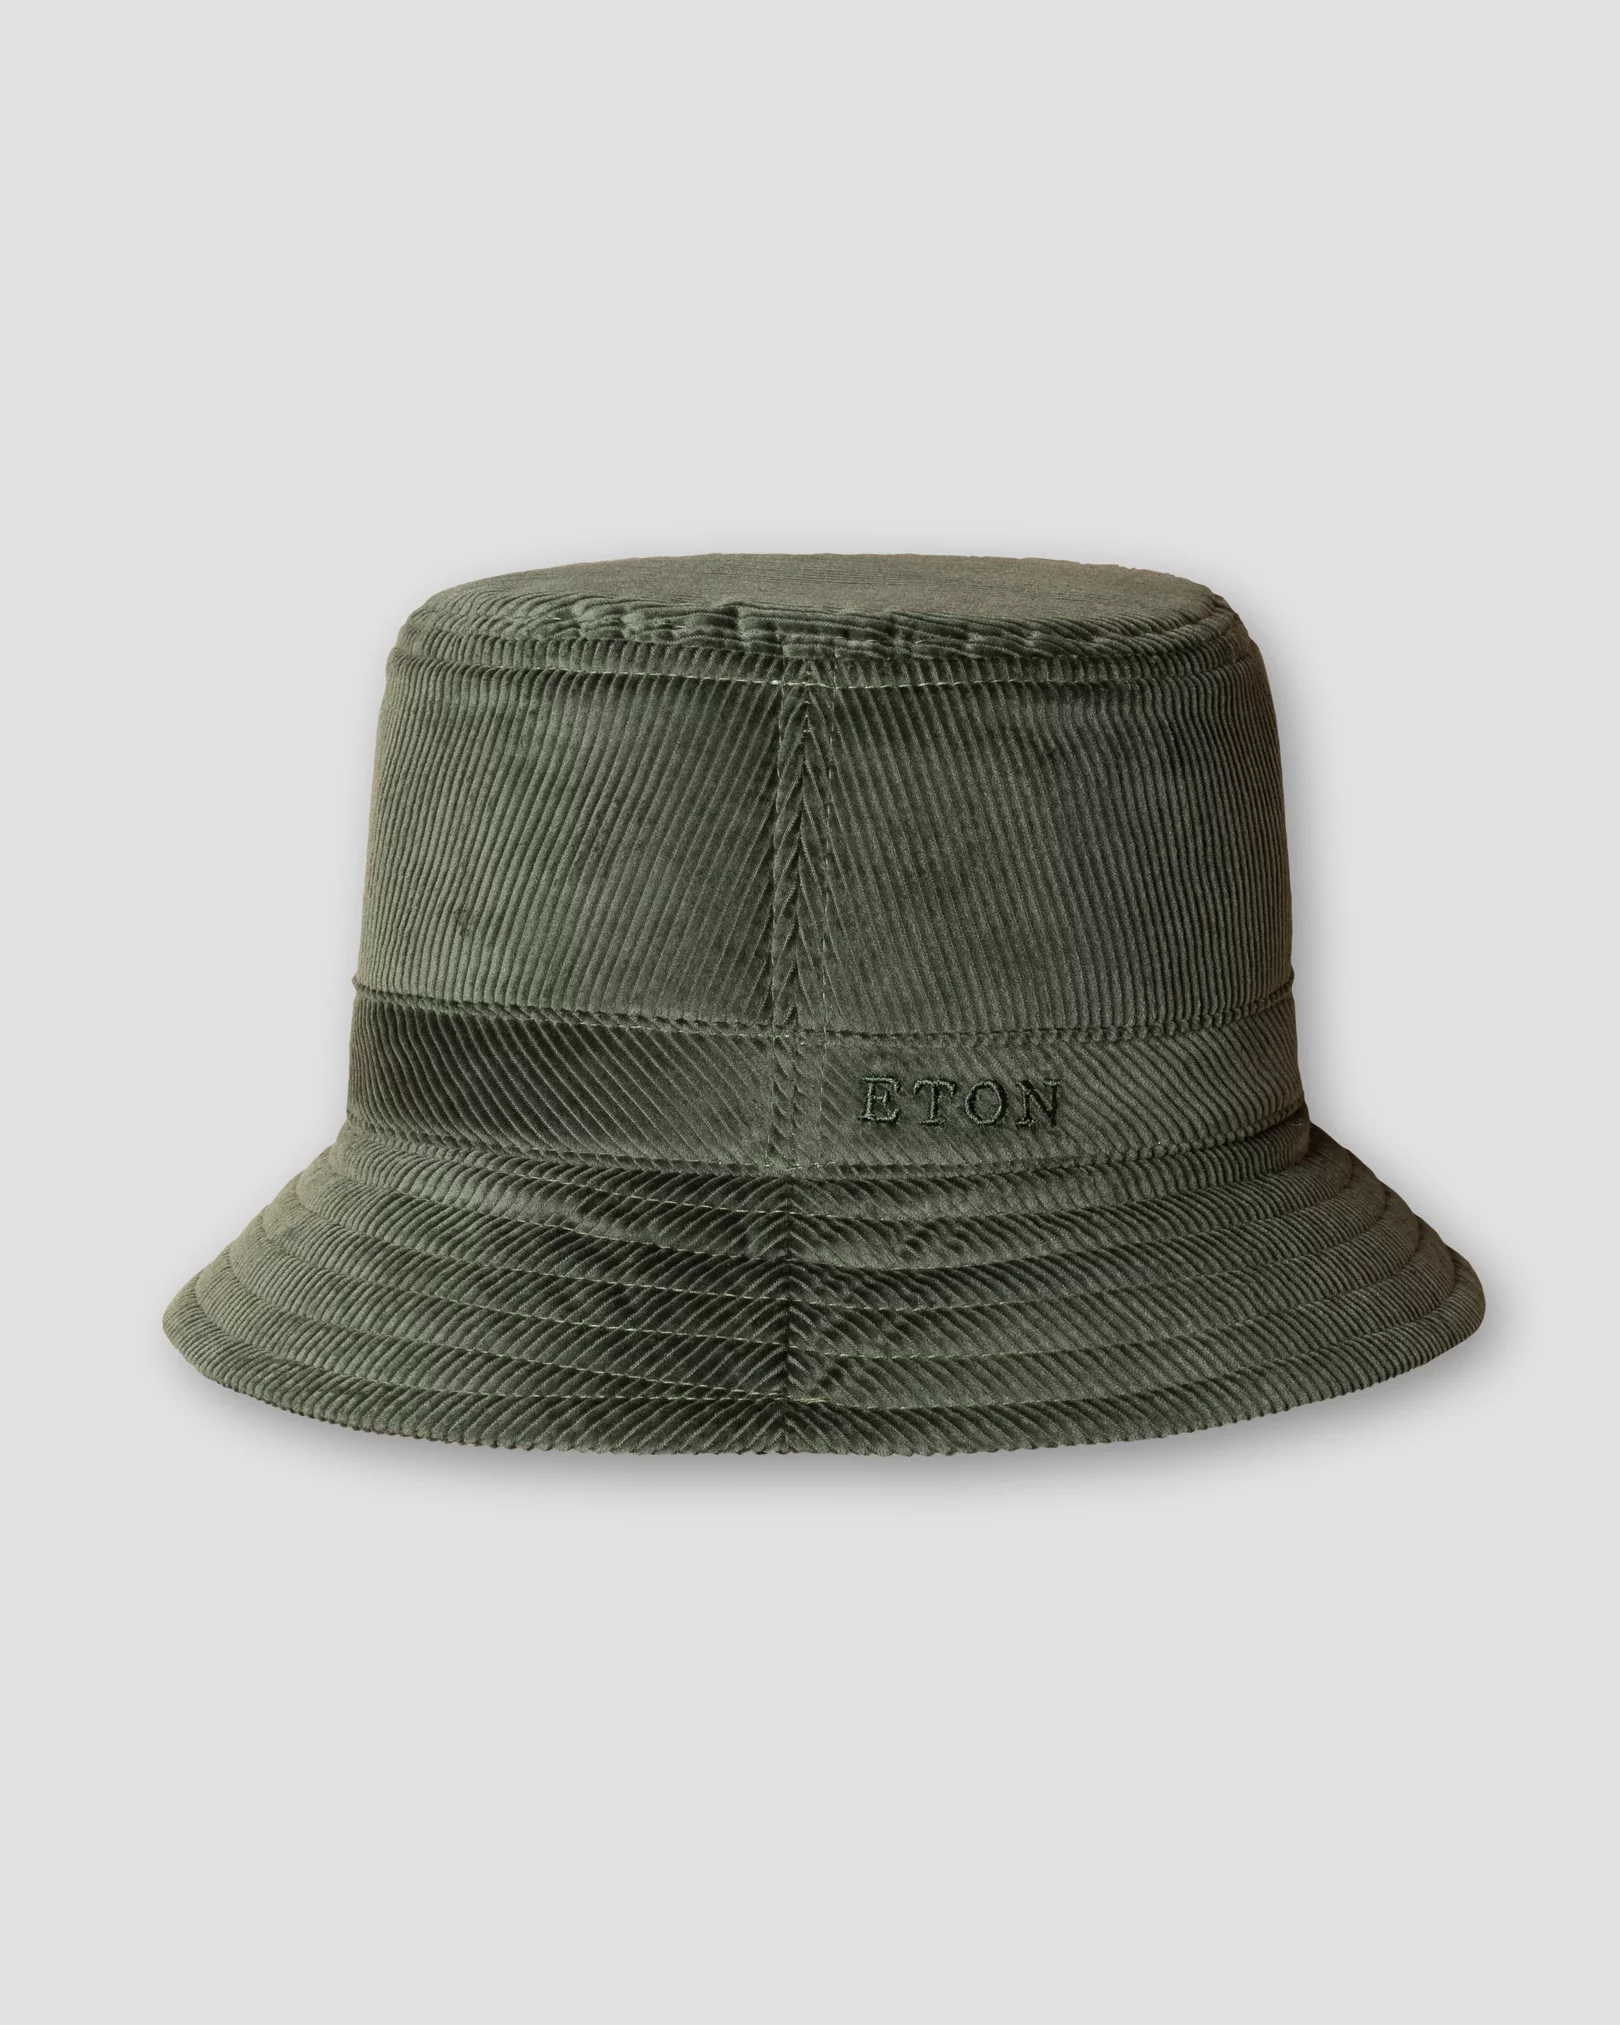 Corduroy Light Green Bucket Hat For Women And Men Perfect For Spring,  Autumn, And Outdoor Activities Soft And Stylish Sun Protection Cap For  Beach, Fishing, Hiking, Sunbathing Expertly Designed And High Quality